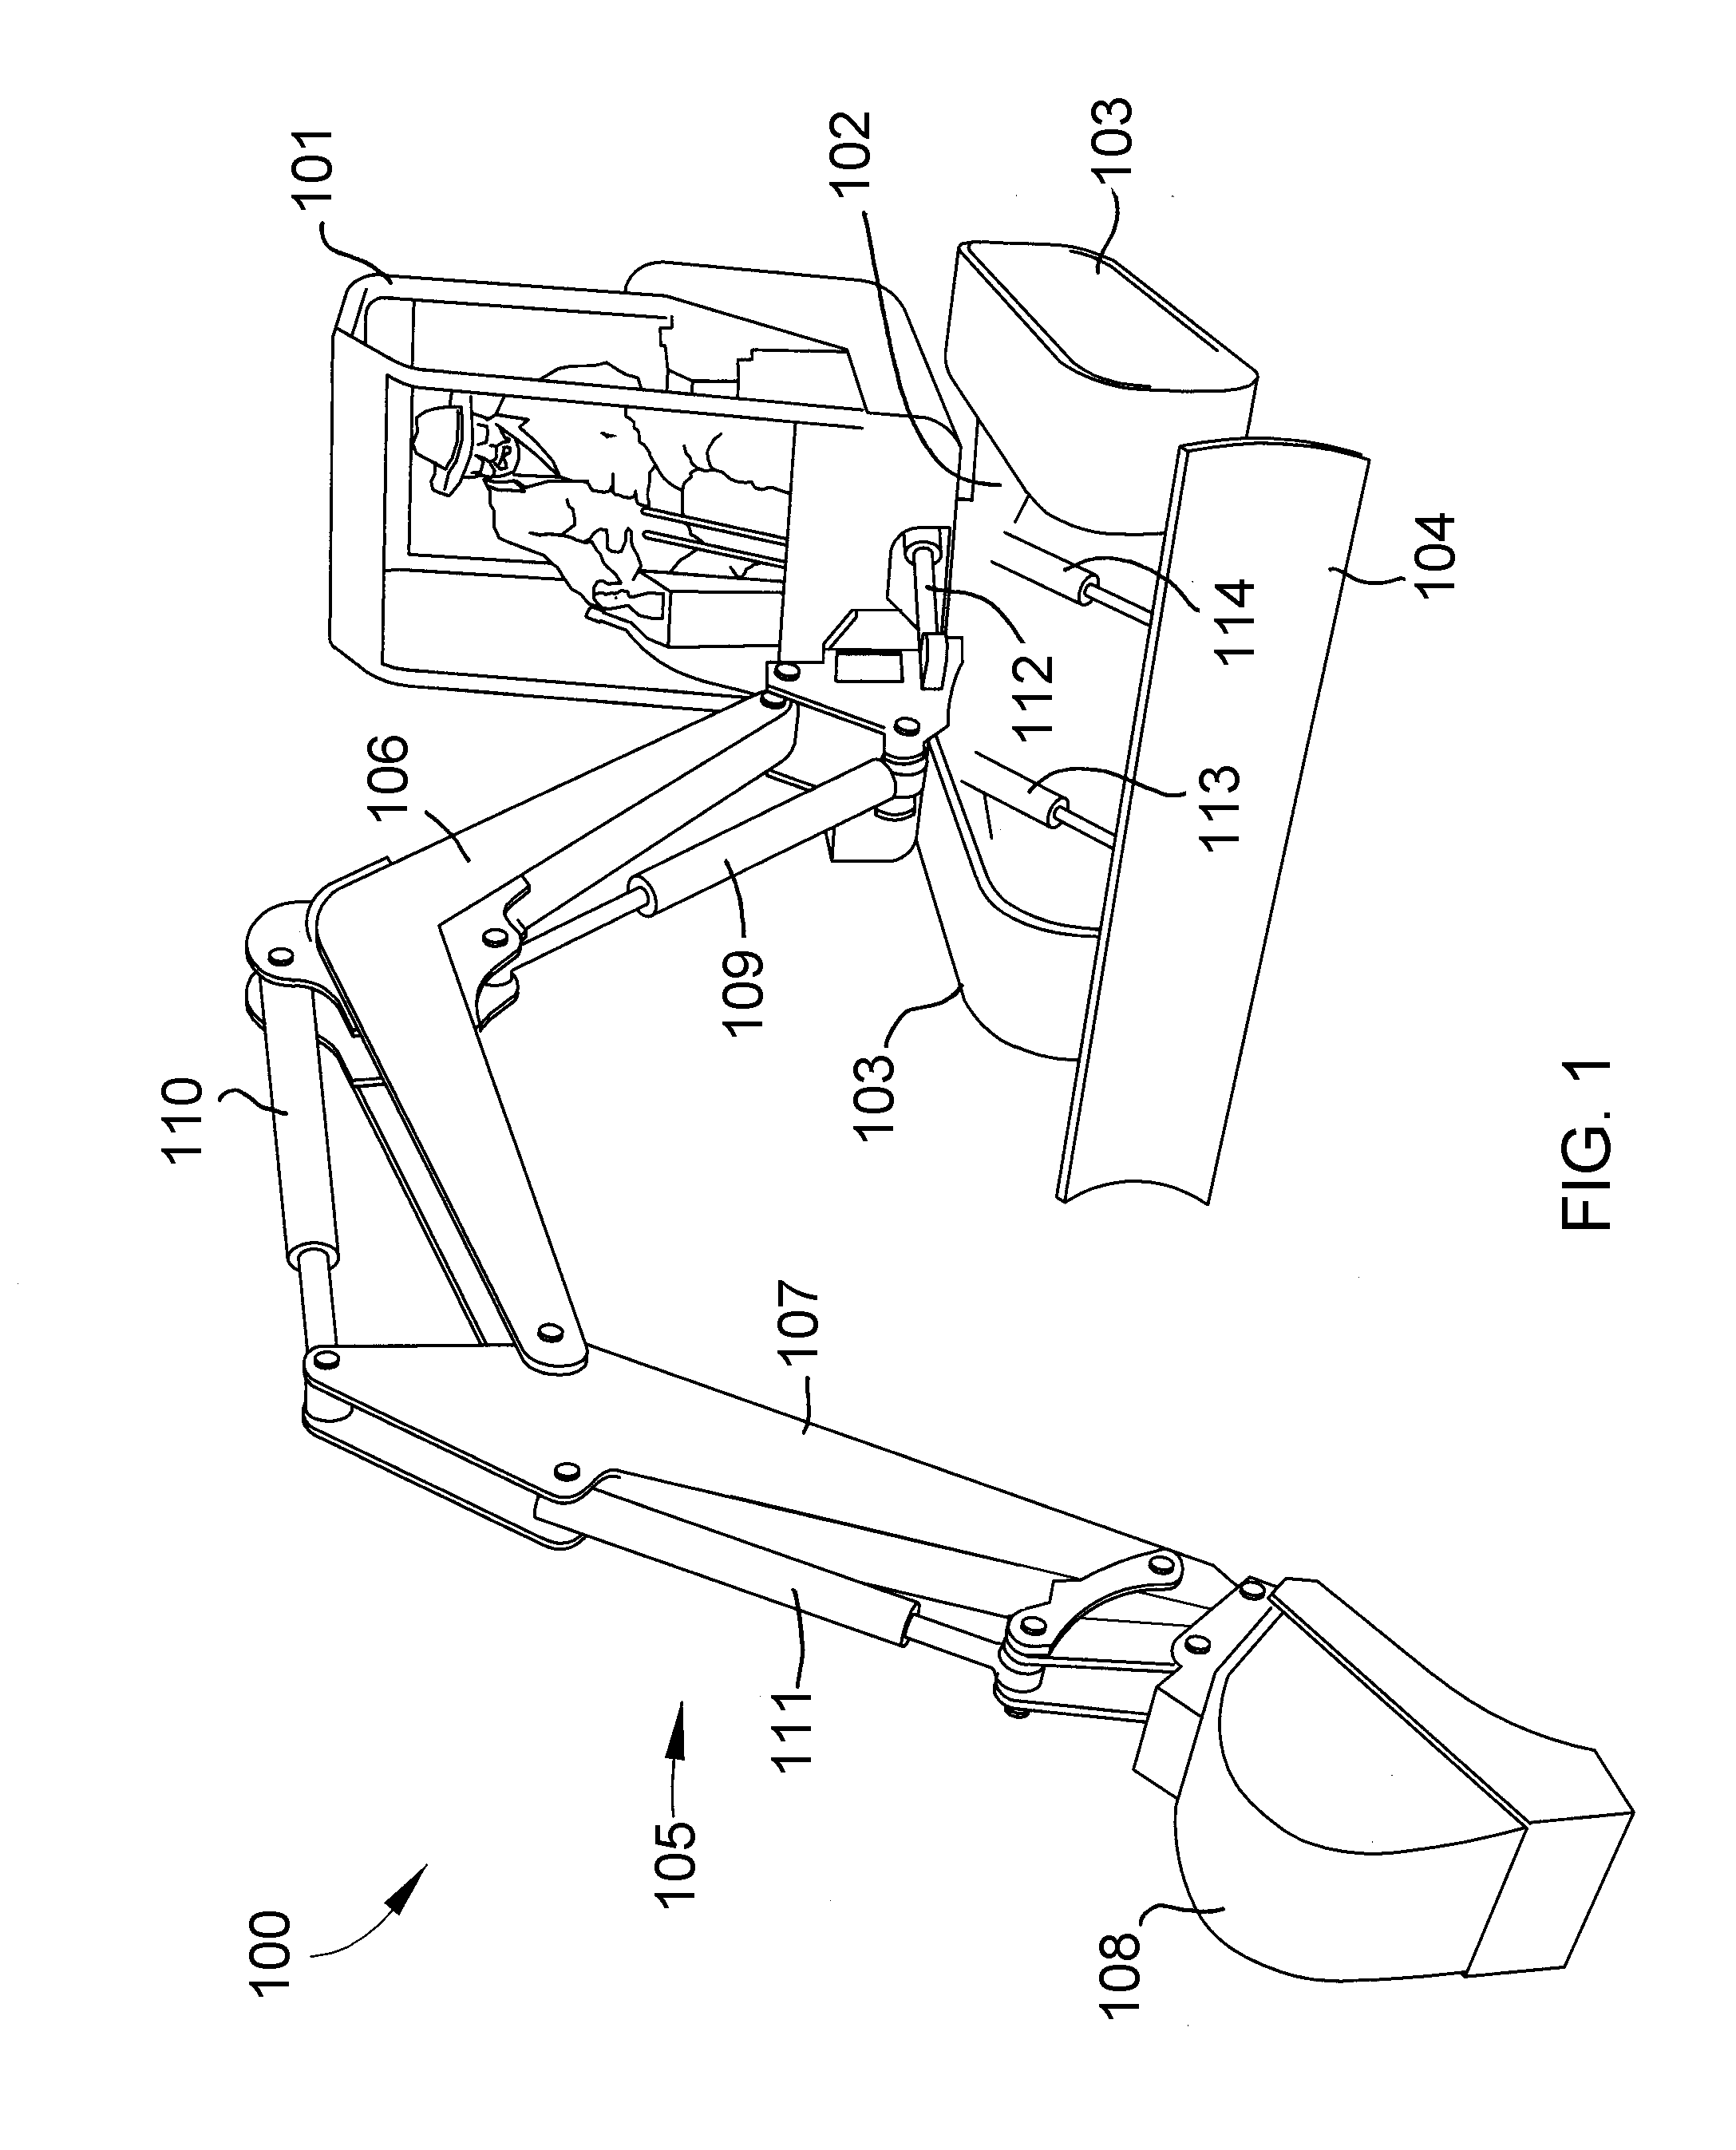 System and method for pump-controlled cylinder cushioning